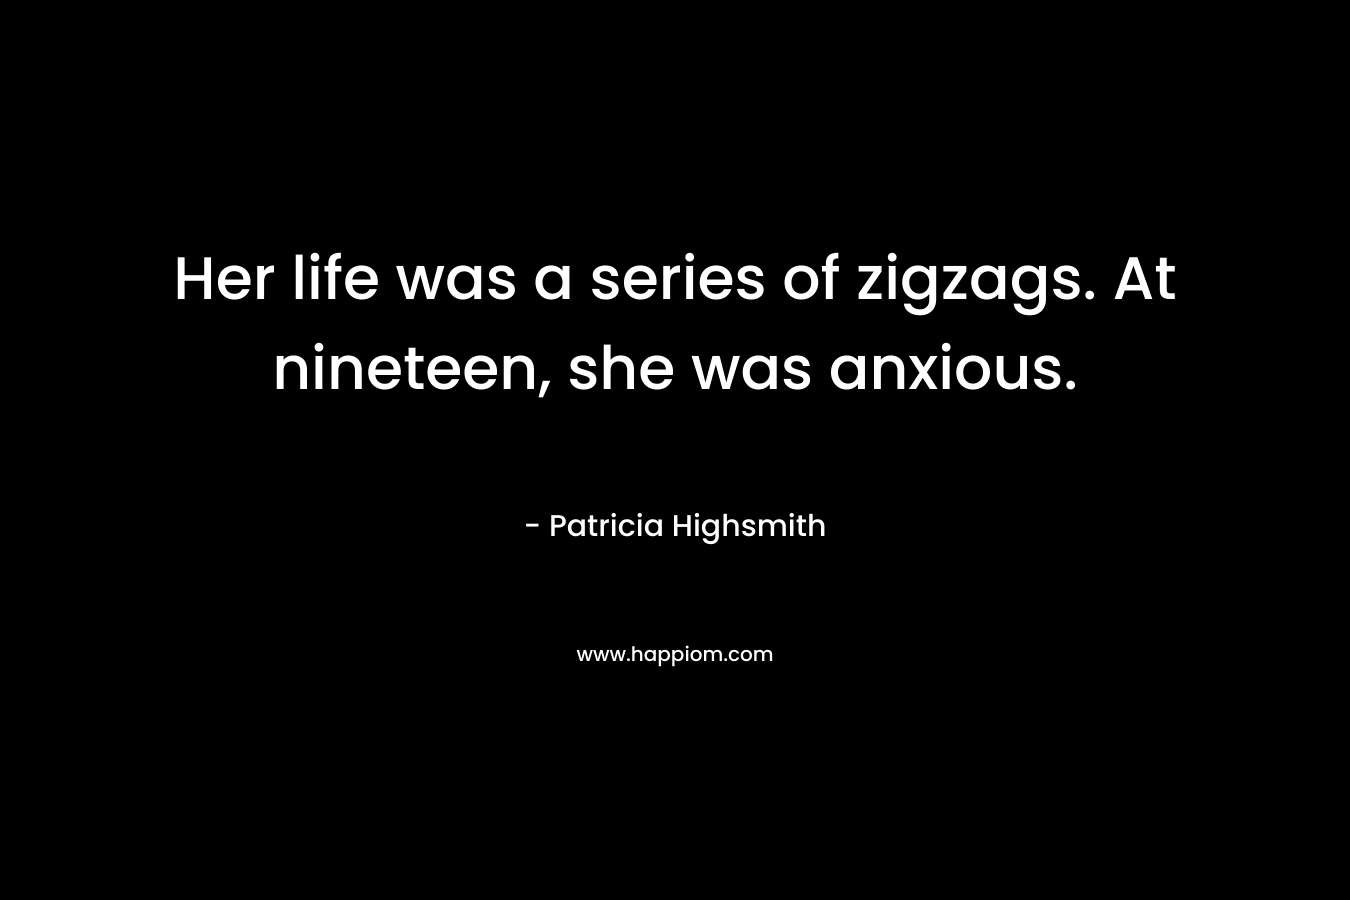 Her life was a series of zigzags. At nineteen, she was anxious. – Patricia Highsmith